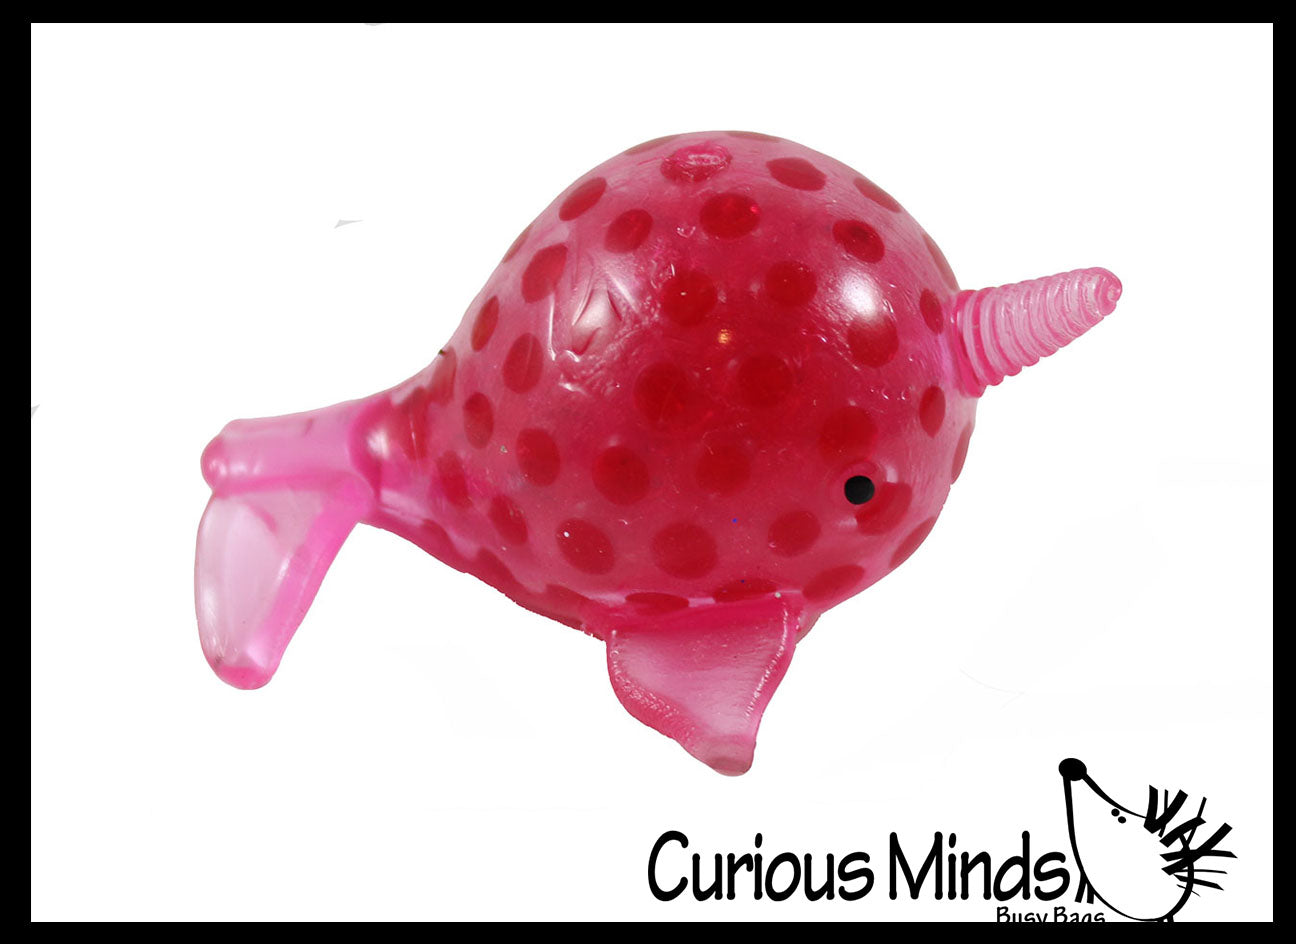 Colored Narwhal Water Bead Filled Squeeze Stress Ball - Sensory, Stress, Fidget Toy Set of All 3